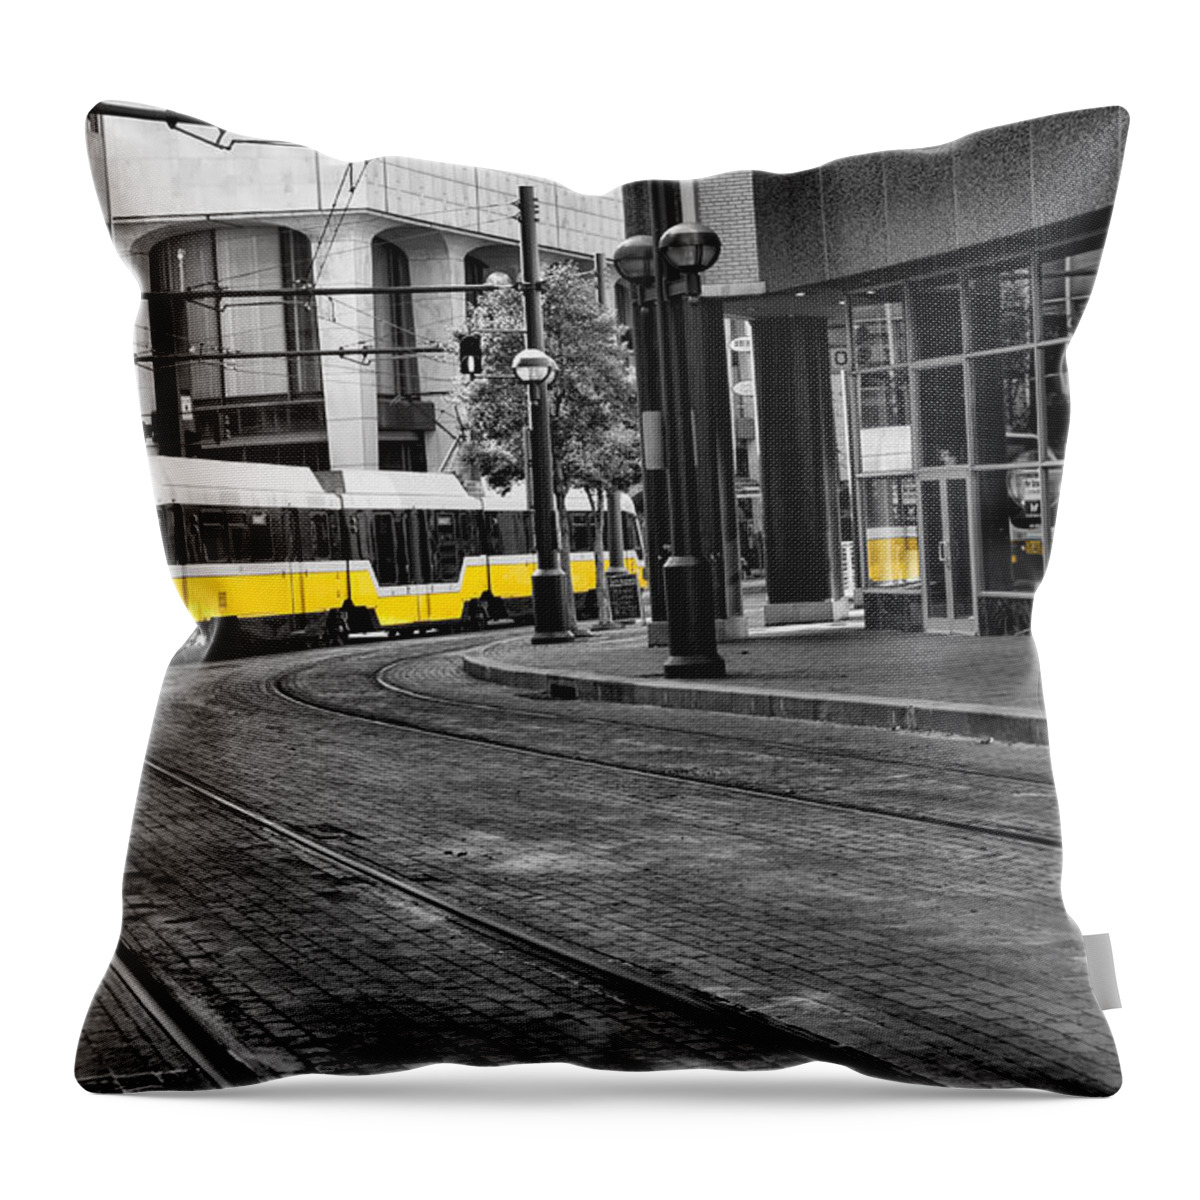 Train Throw Pillow featuring the photograph The Yellow Train of Dallas by Kathy Churchman